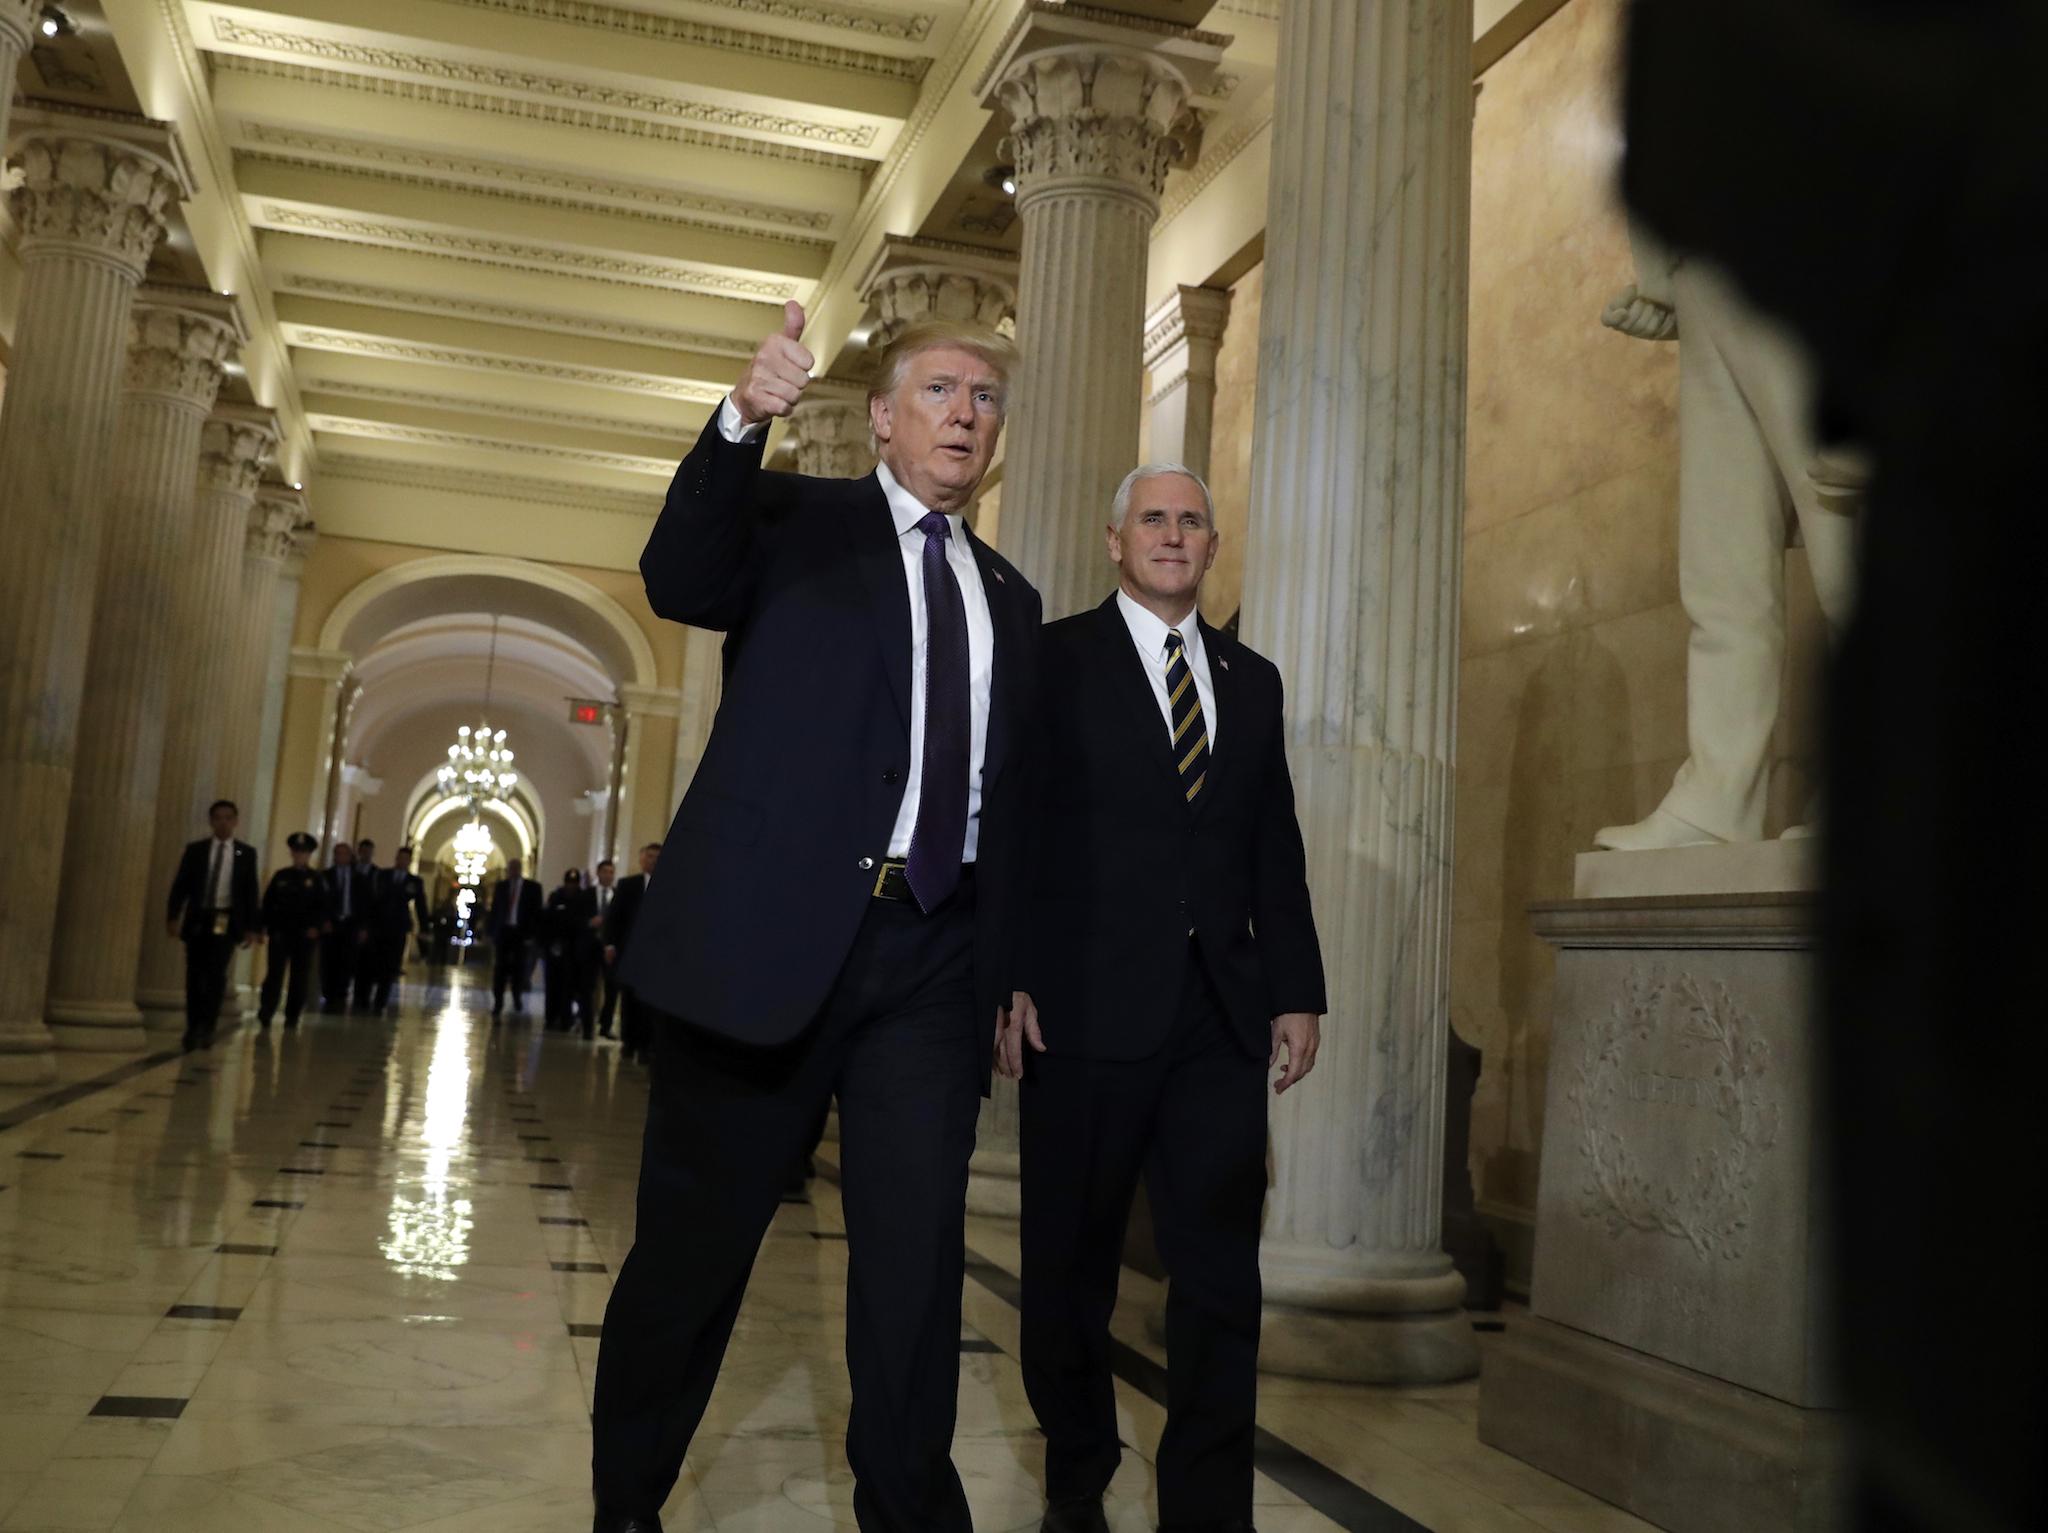 President Donald Trump leaves Capitol Hill after meeting with lawmakers on tax policy (AP Photo/Evan Vucci)